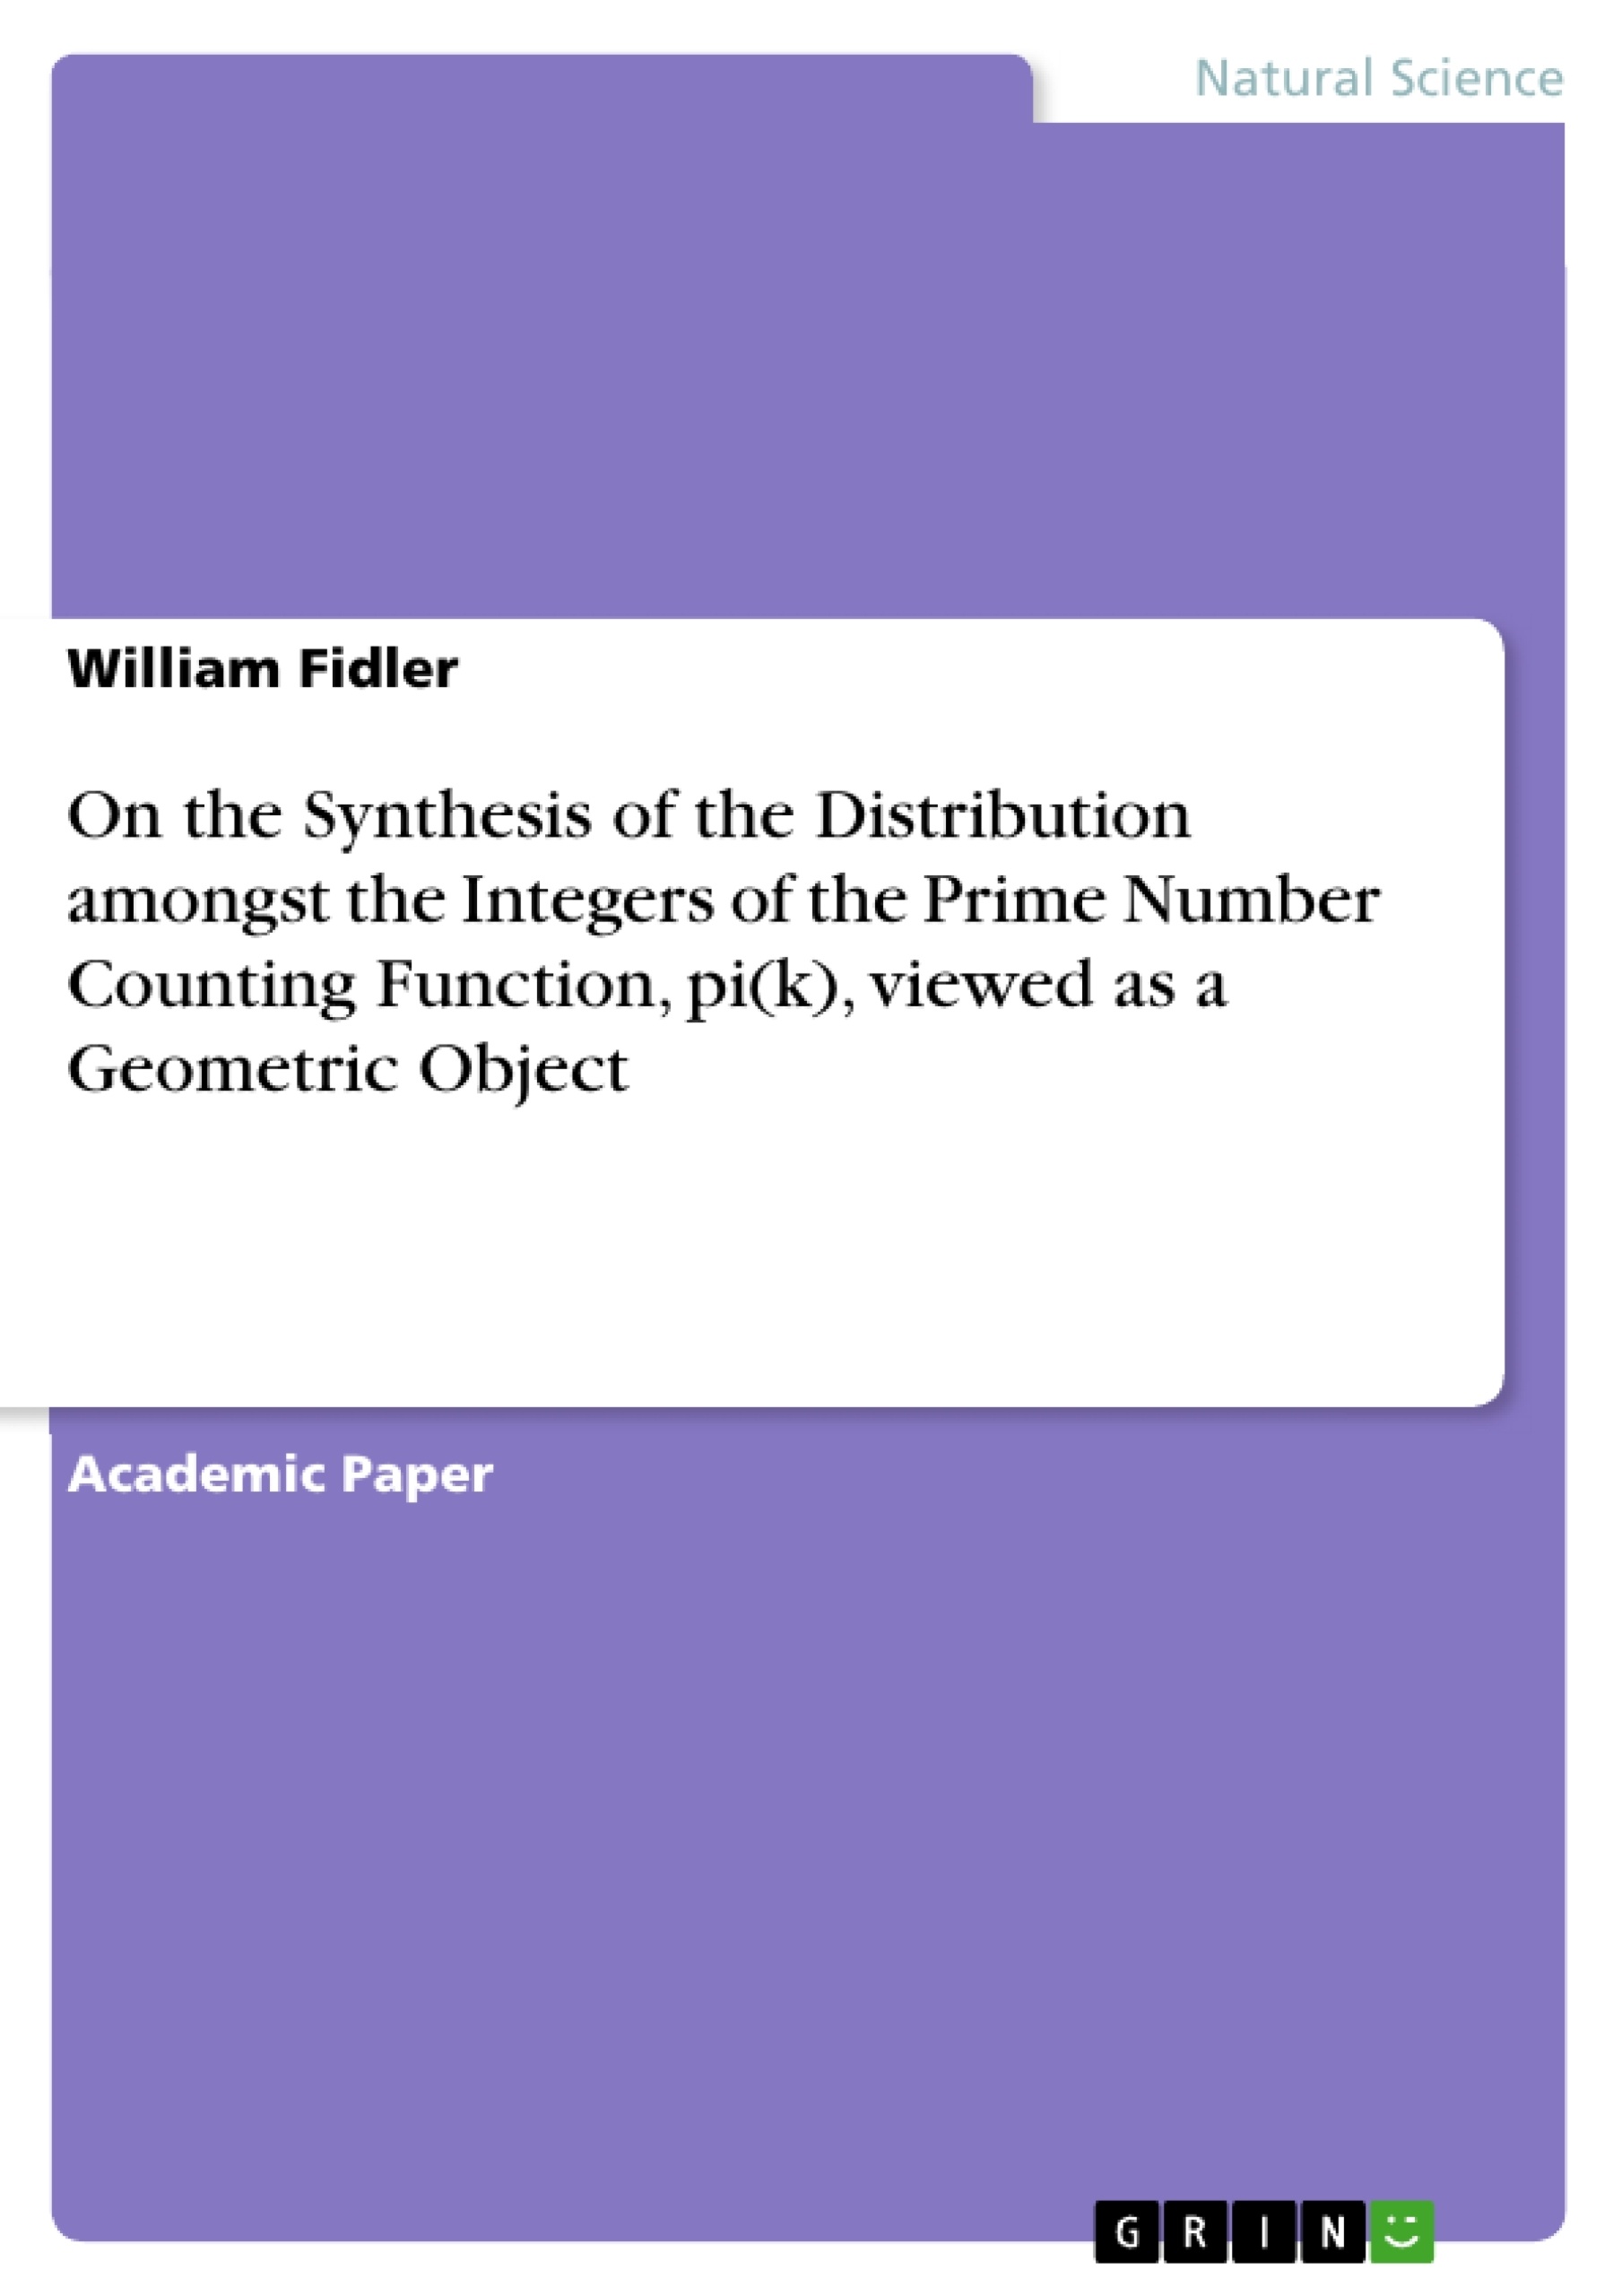 Titre: On the Synthesis of the Distribution amongst the Integers of the Prime Number Counting Function, pi(k), viewed as a Geometric Object